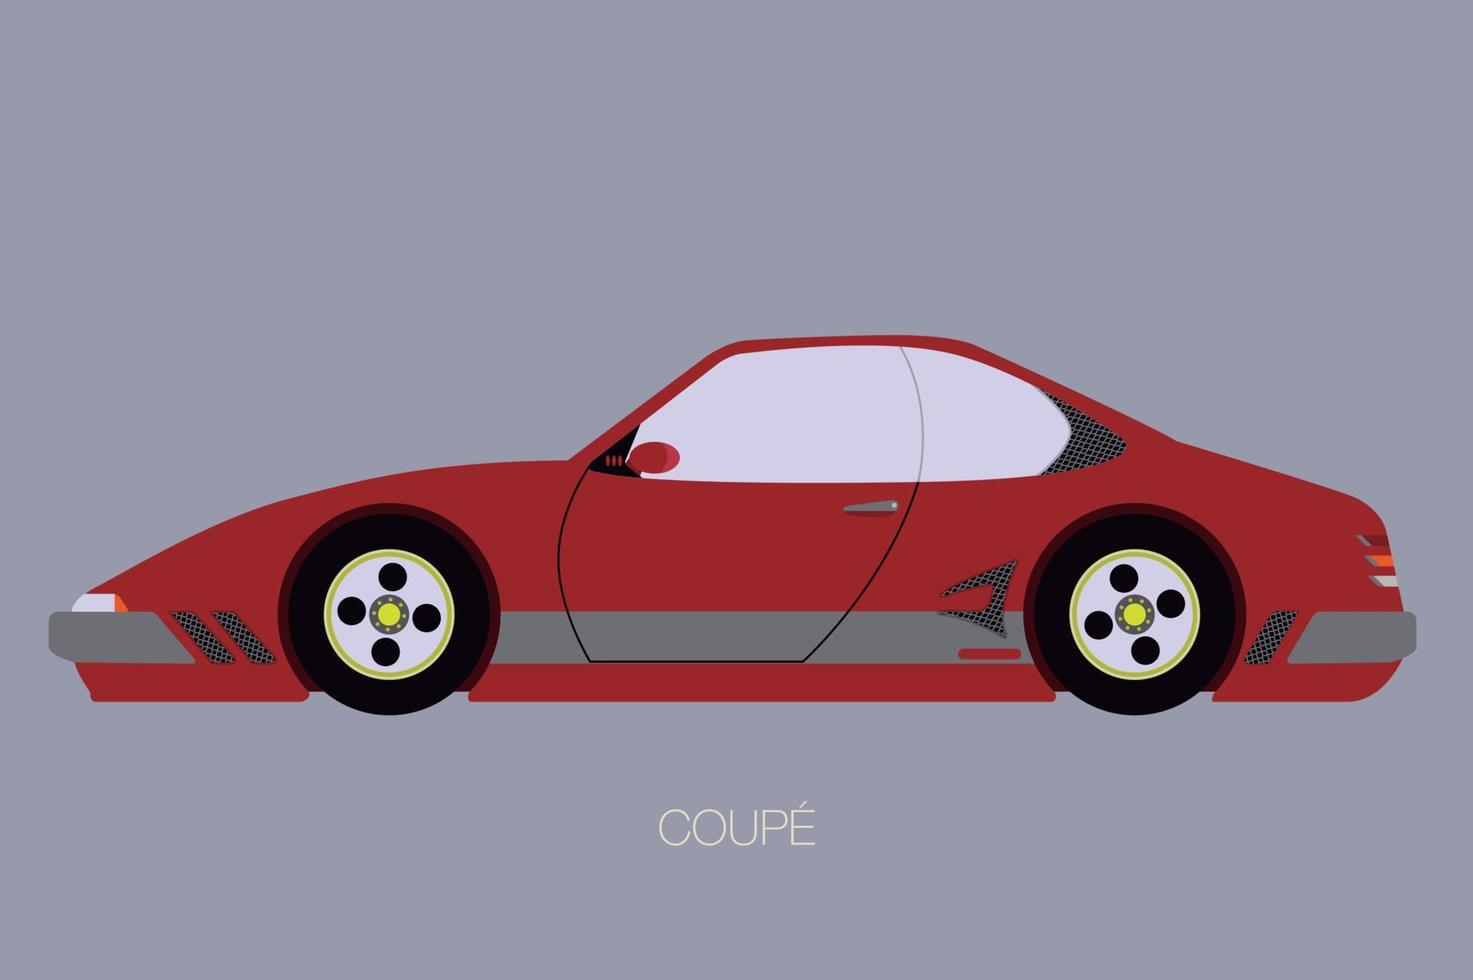 Car from the side view illustration. fully editable vector